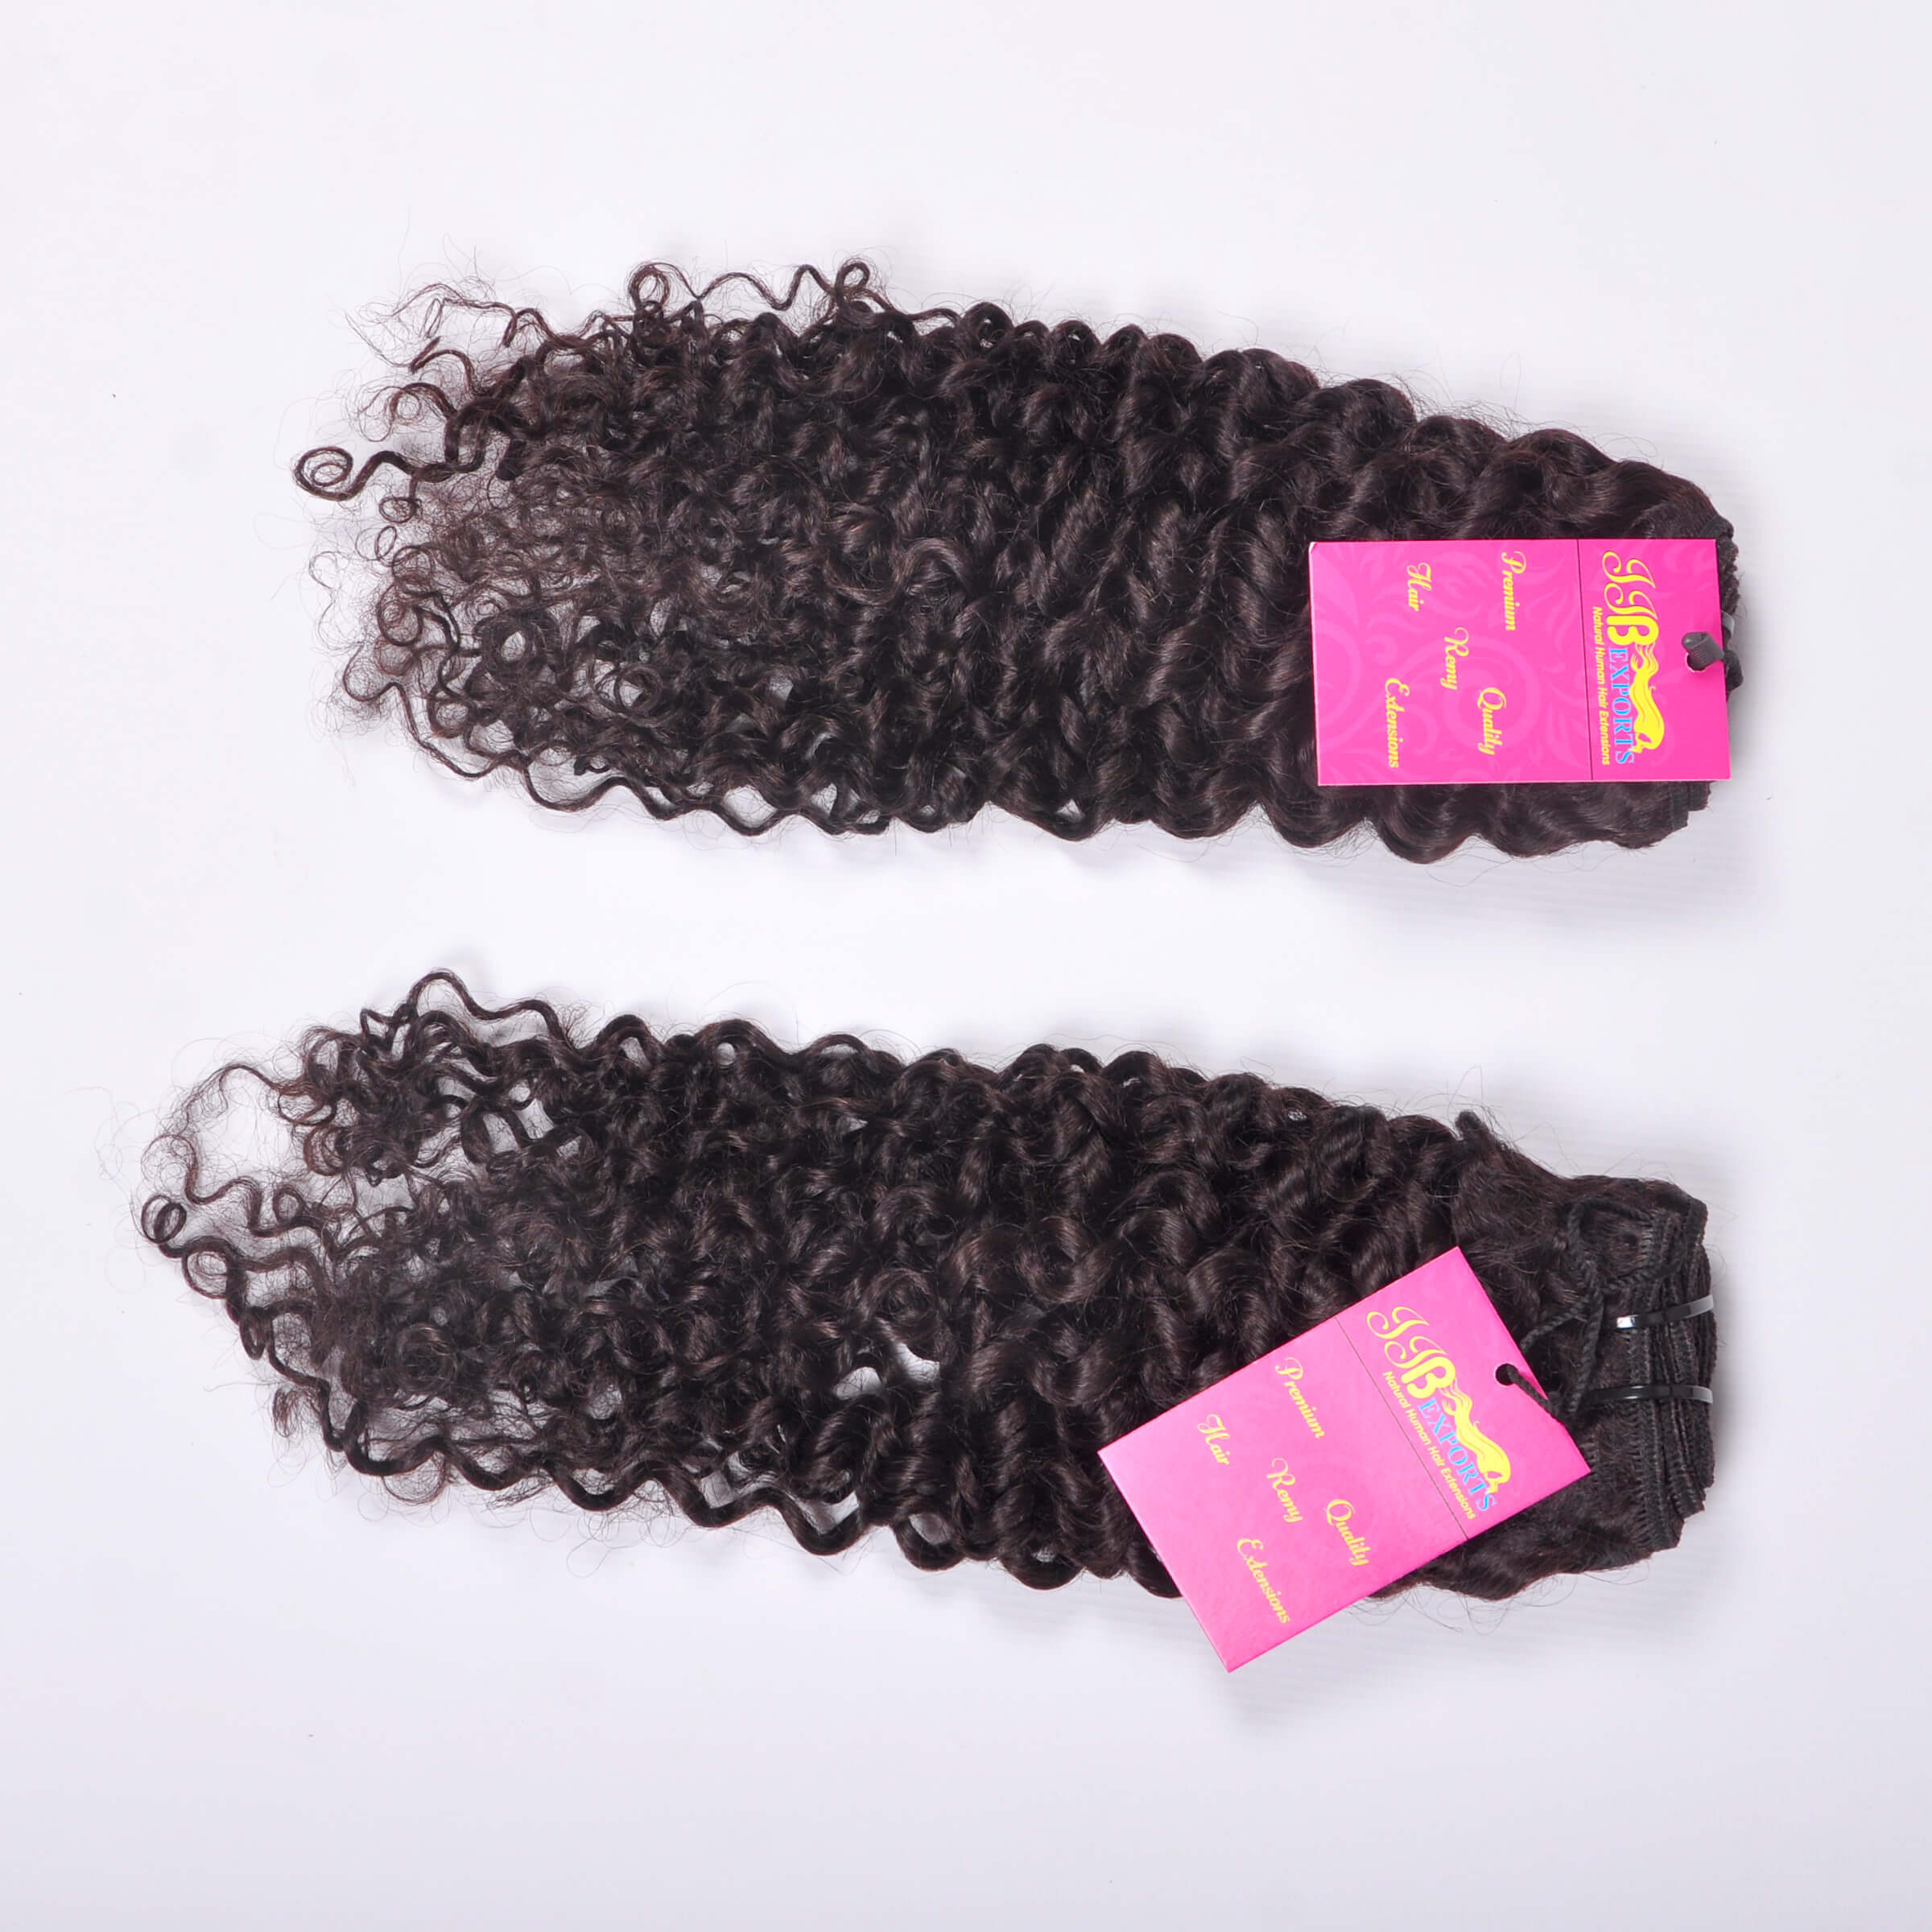 Natural Raw Virgin Cuticle Aligned Curly/Wavy Human Remy Hair Bundle With Closure Frontal Hair